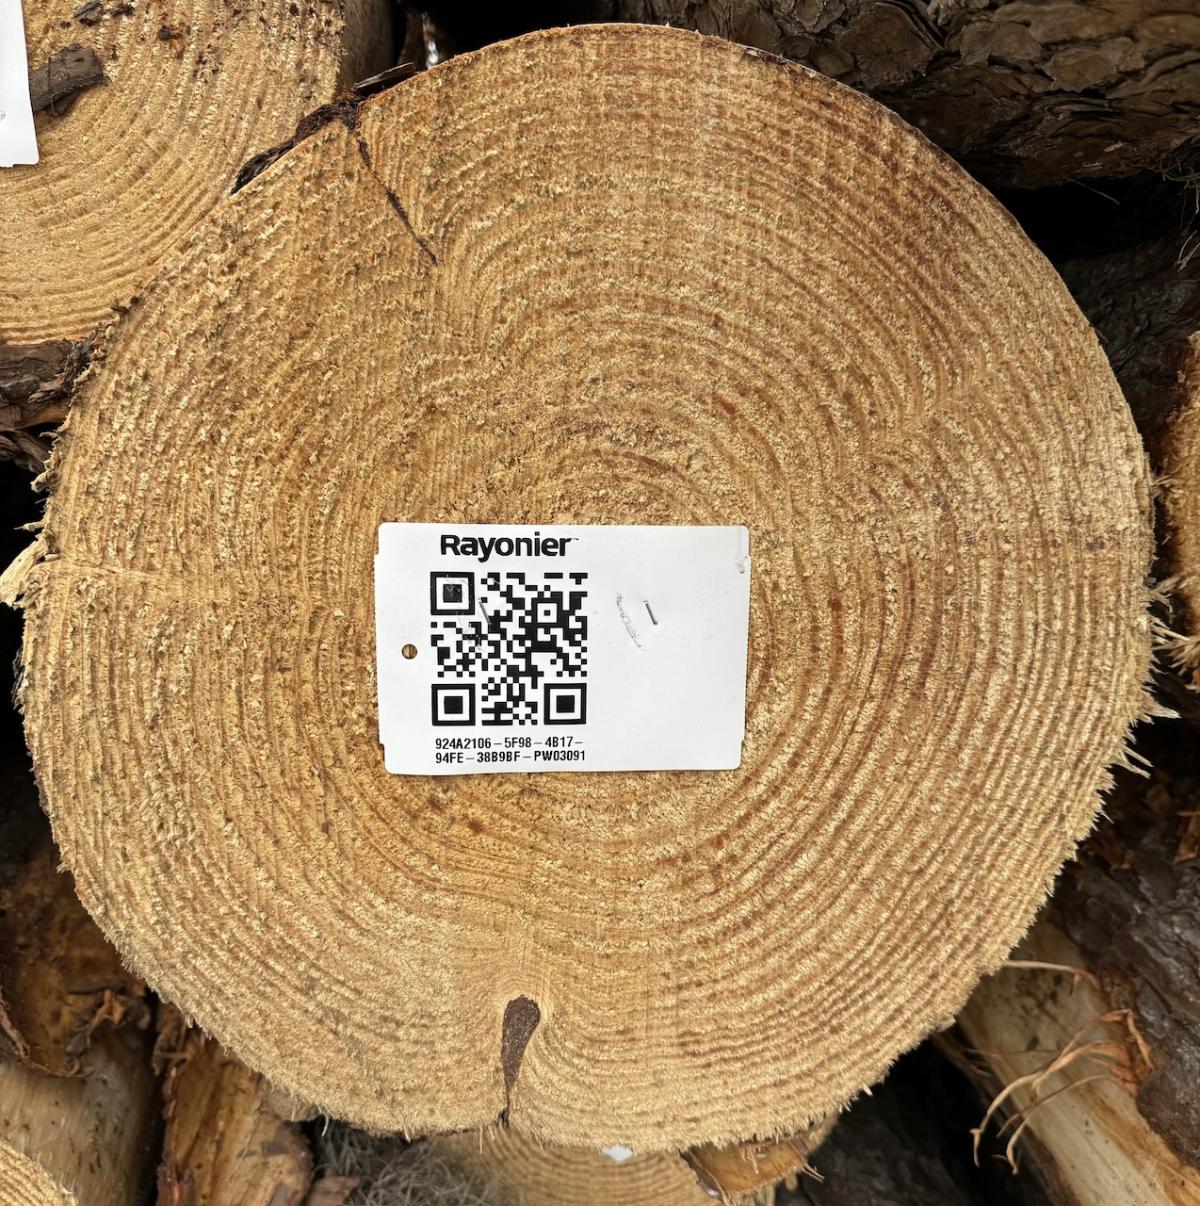 photo of the QR code on a log